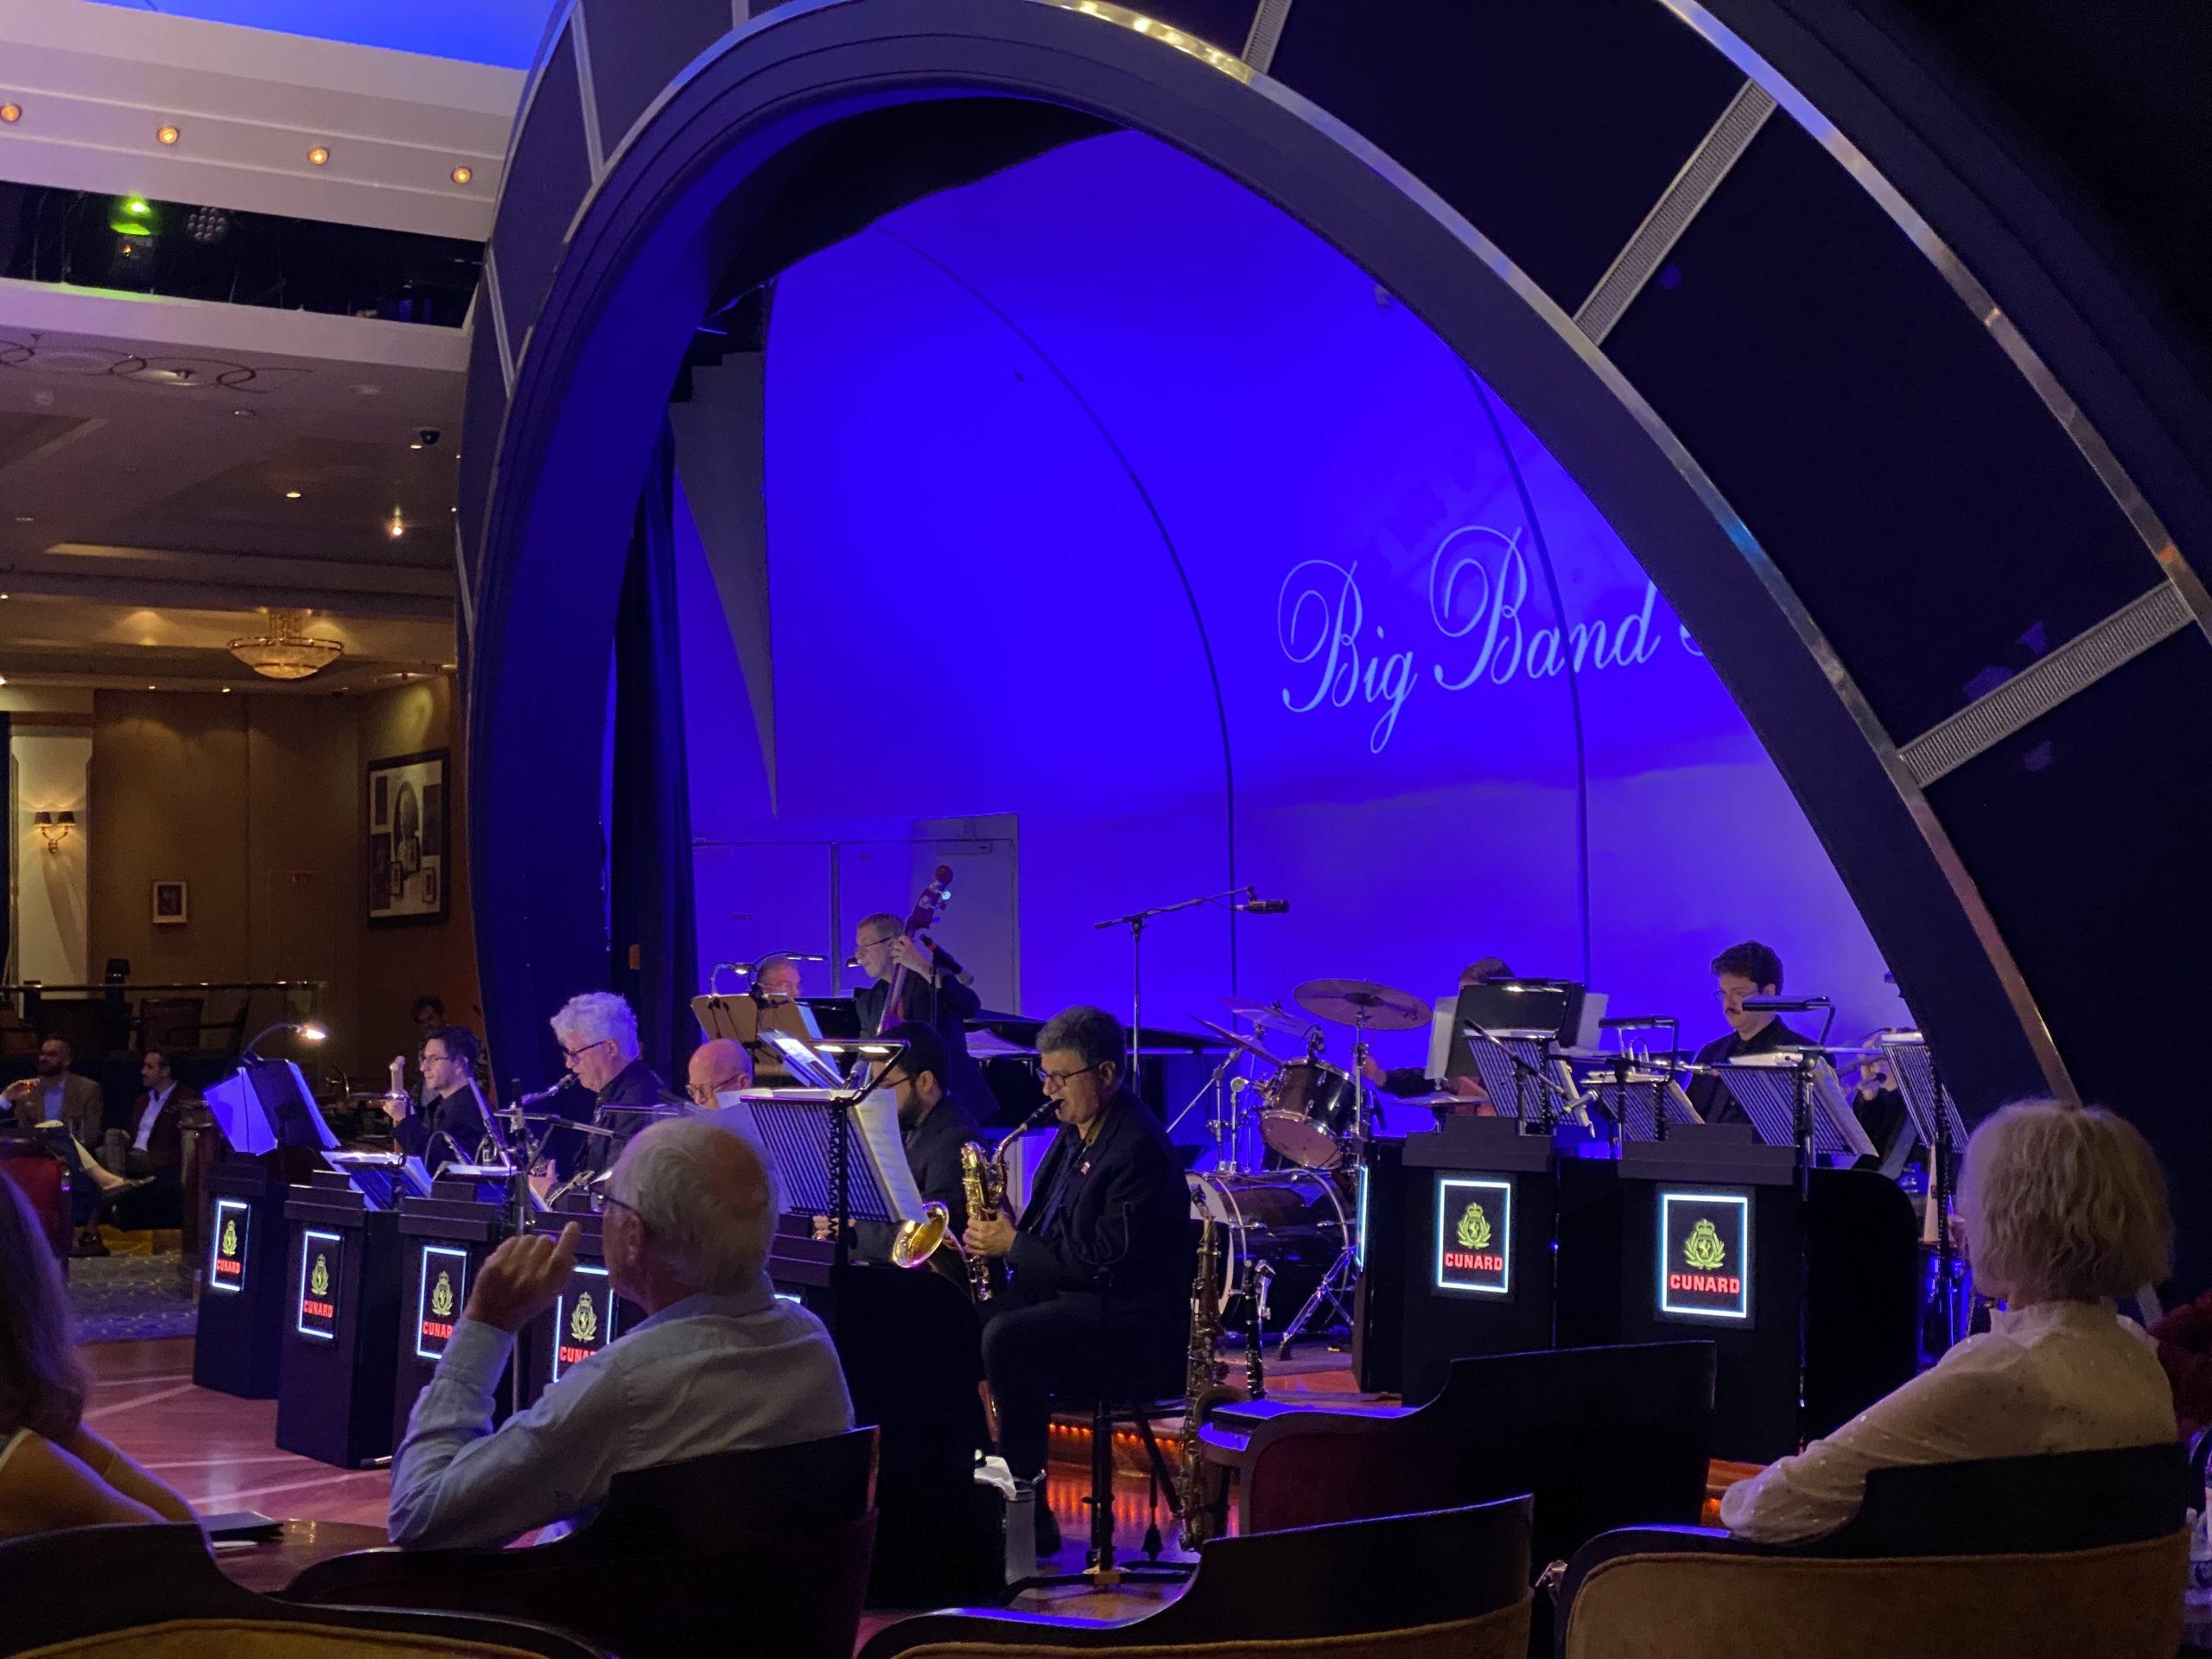 Musicians playing big band music from the stage at the front of the dancefloor of the ship's ballroom.